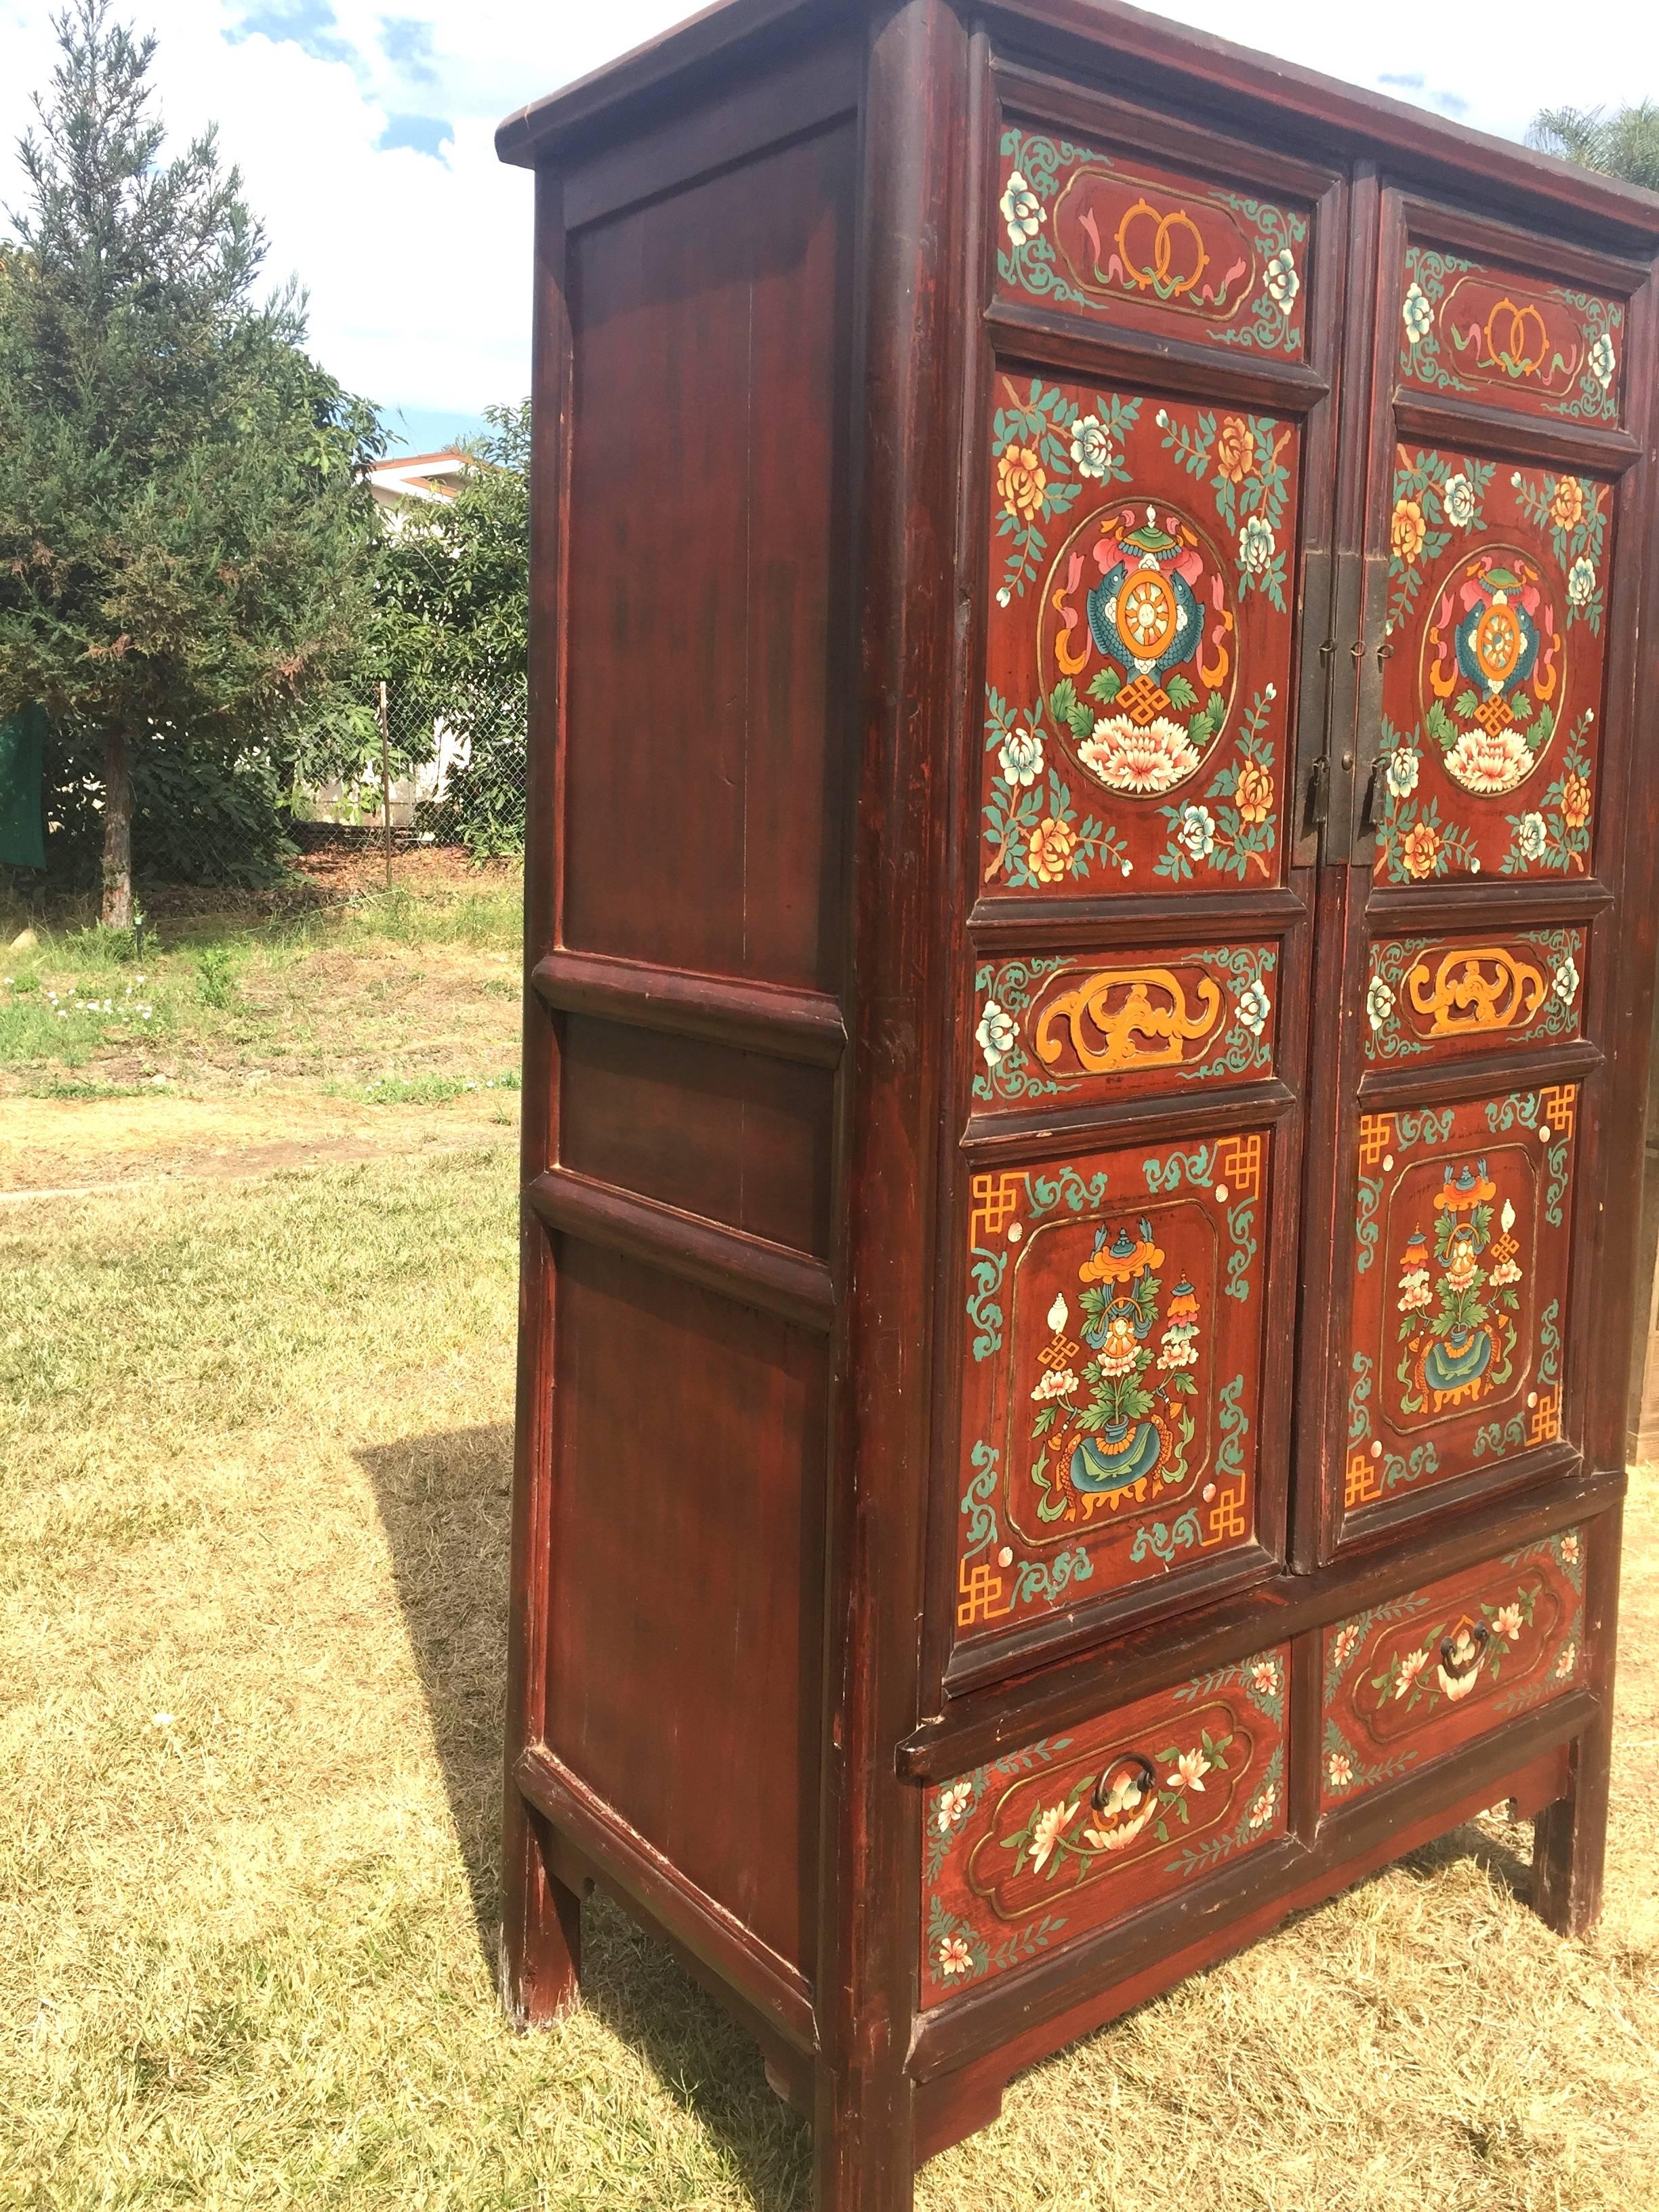 A hand-painted antique Tibetan cabinet. 

This large piece features hand-painted "7 auspicious symbols" in the Tibetan culture. The main areas show umbrella shielded prayer wheels flanked by fish above unity symbols on top of peonies. Such